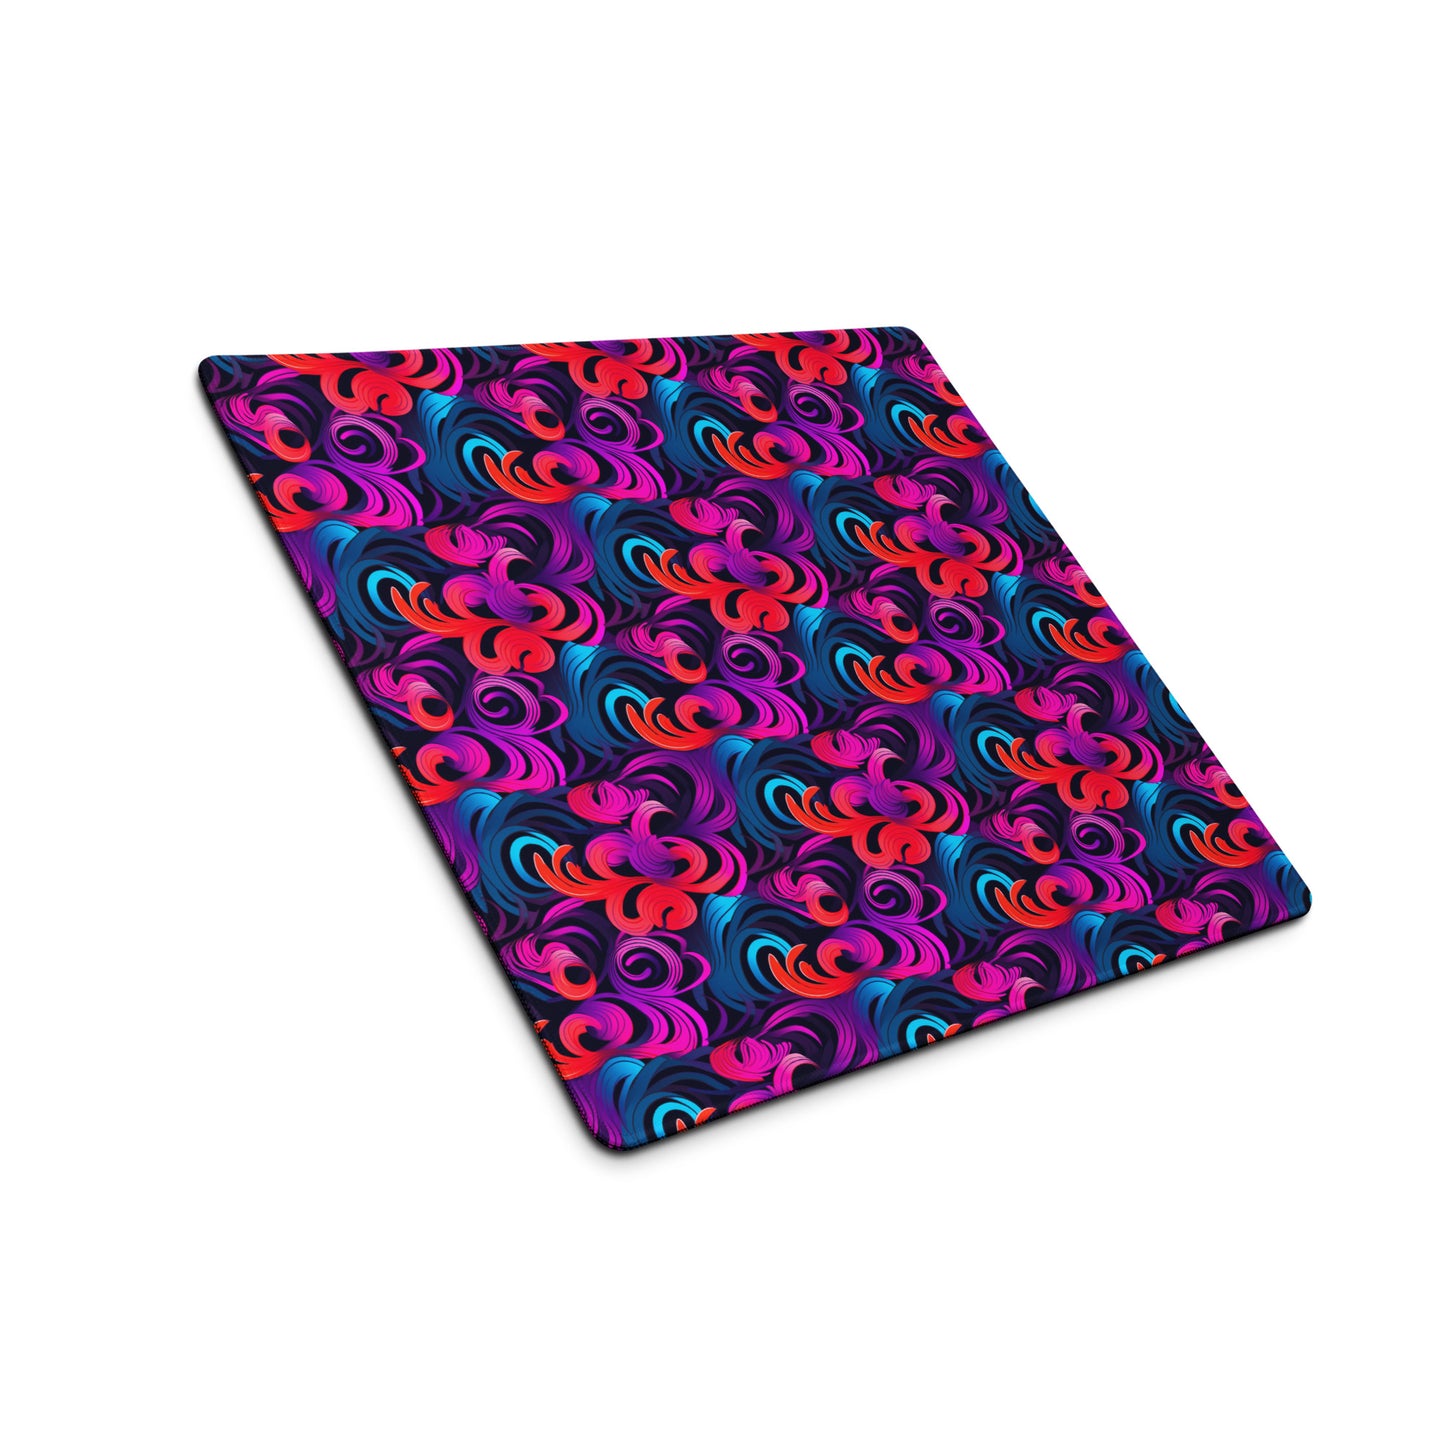 An 18" x 16" desk pad with a bright floral pattern all over it shown at an angle. Blue, Purple and Red in color.